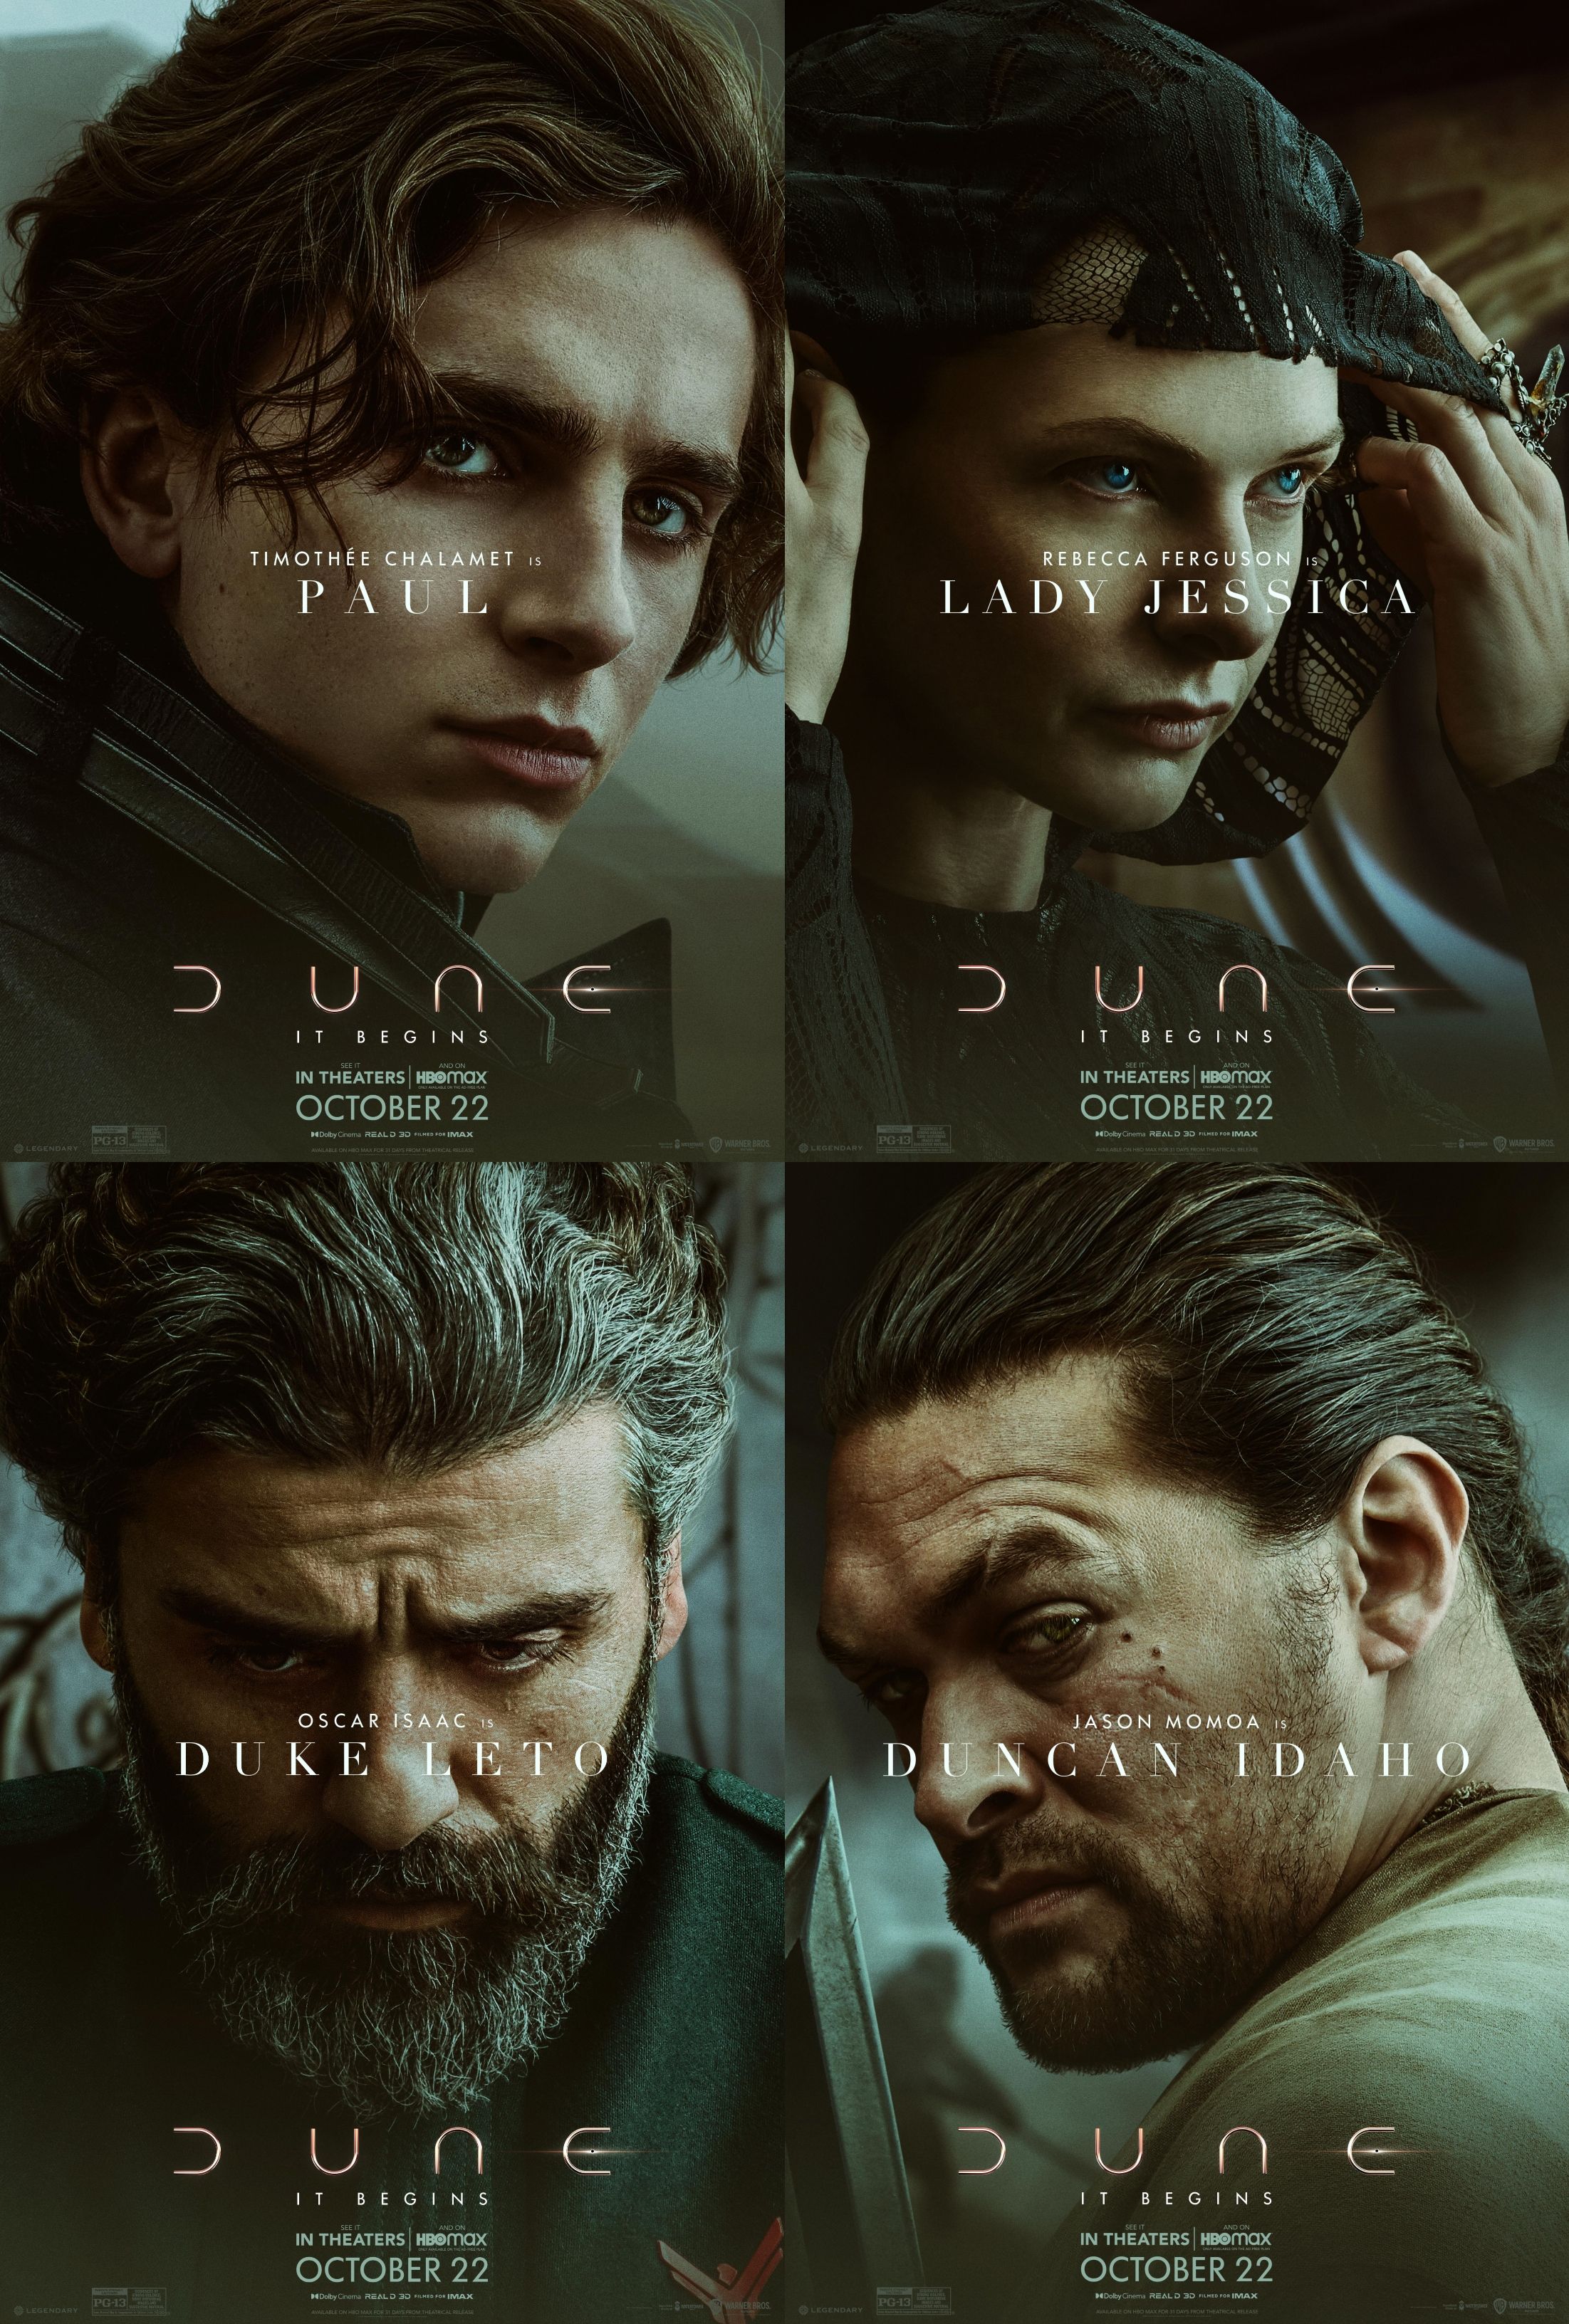 Dune character posters